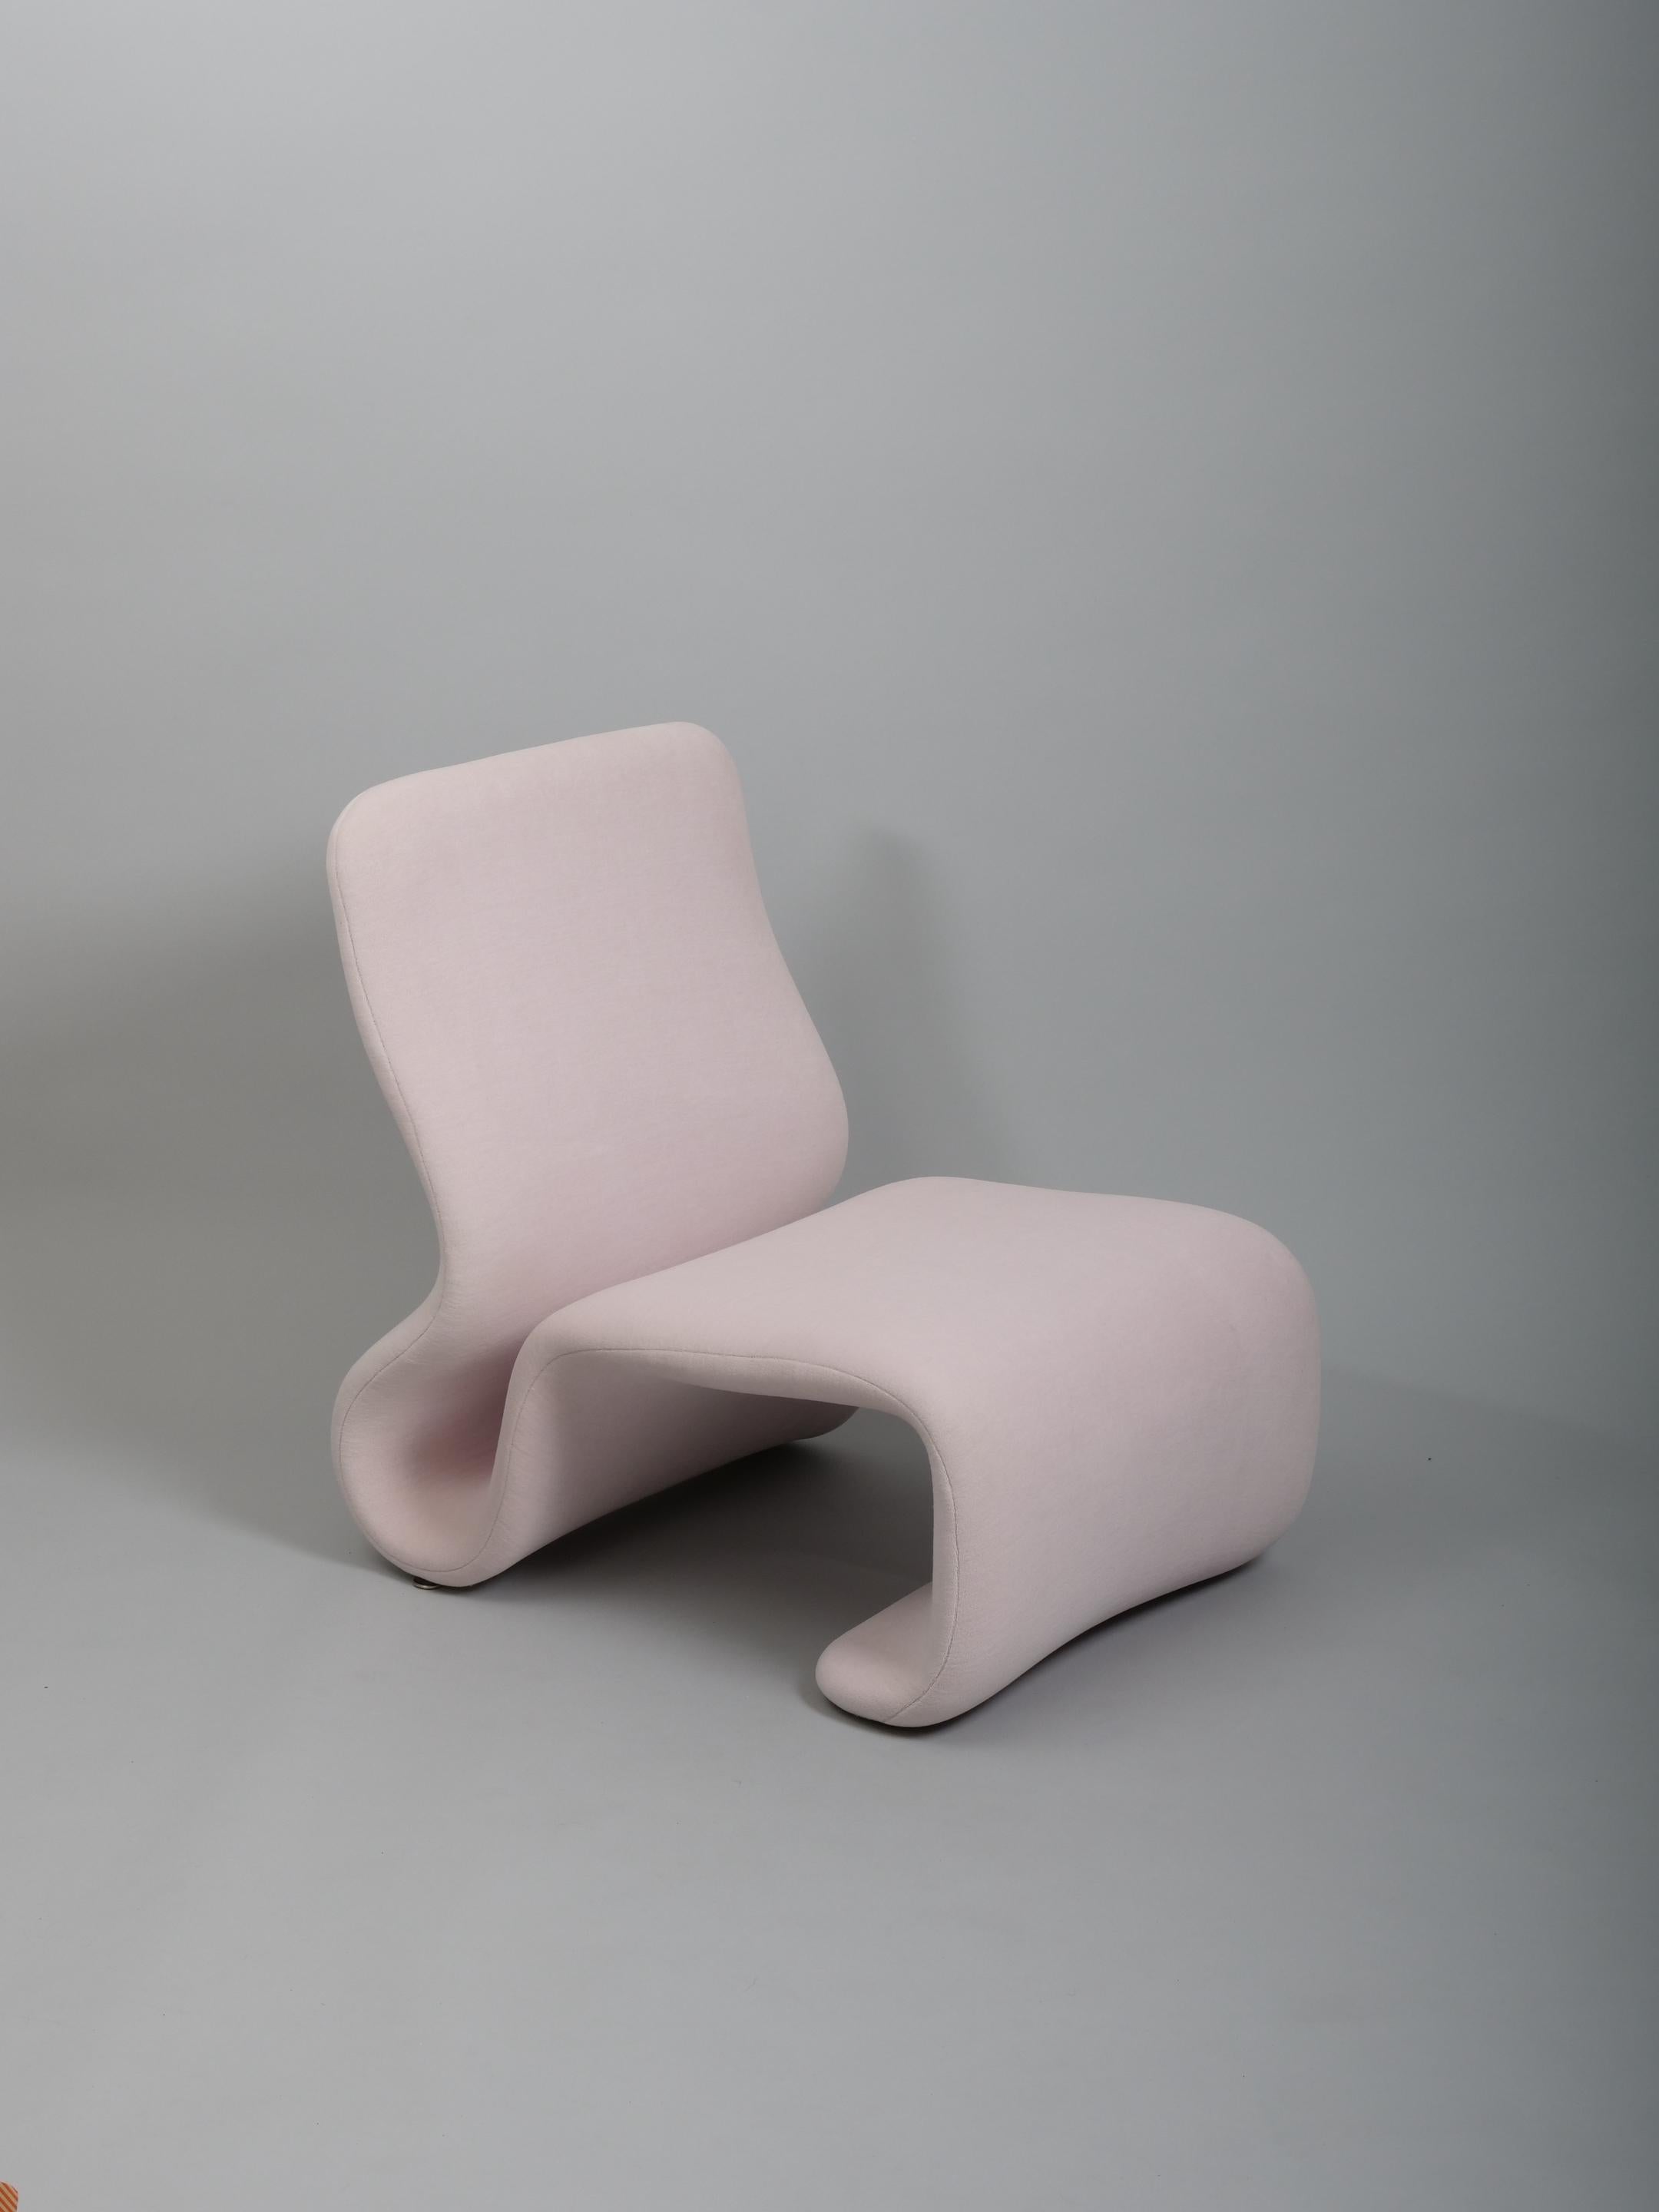 An early example of the sculptural  'Etcetera' chair by Jan Eskelius. 
Sweden c1970

Re upholstered in palest pink Kradvat velvet.

